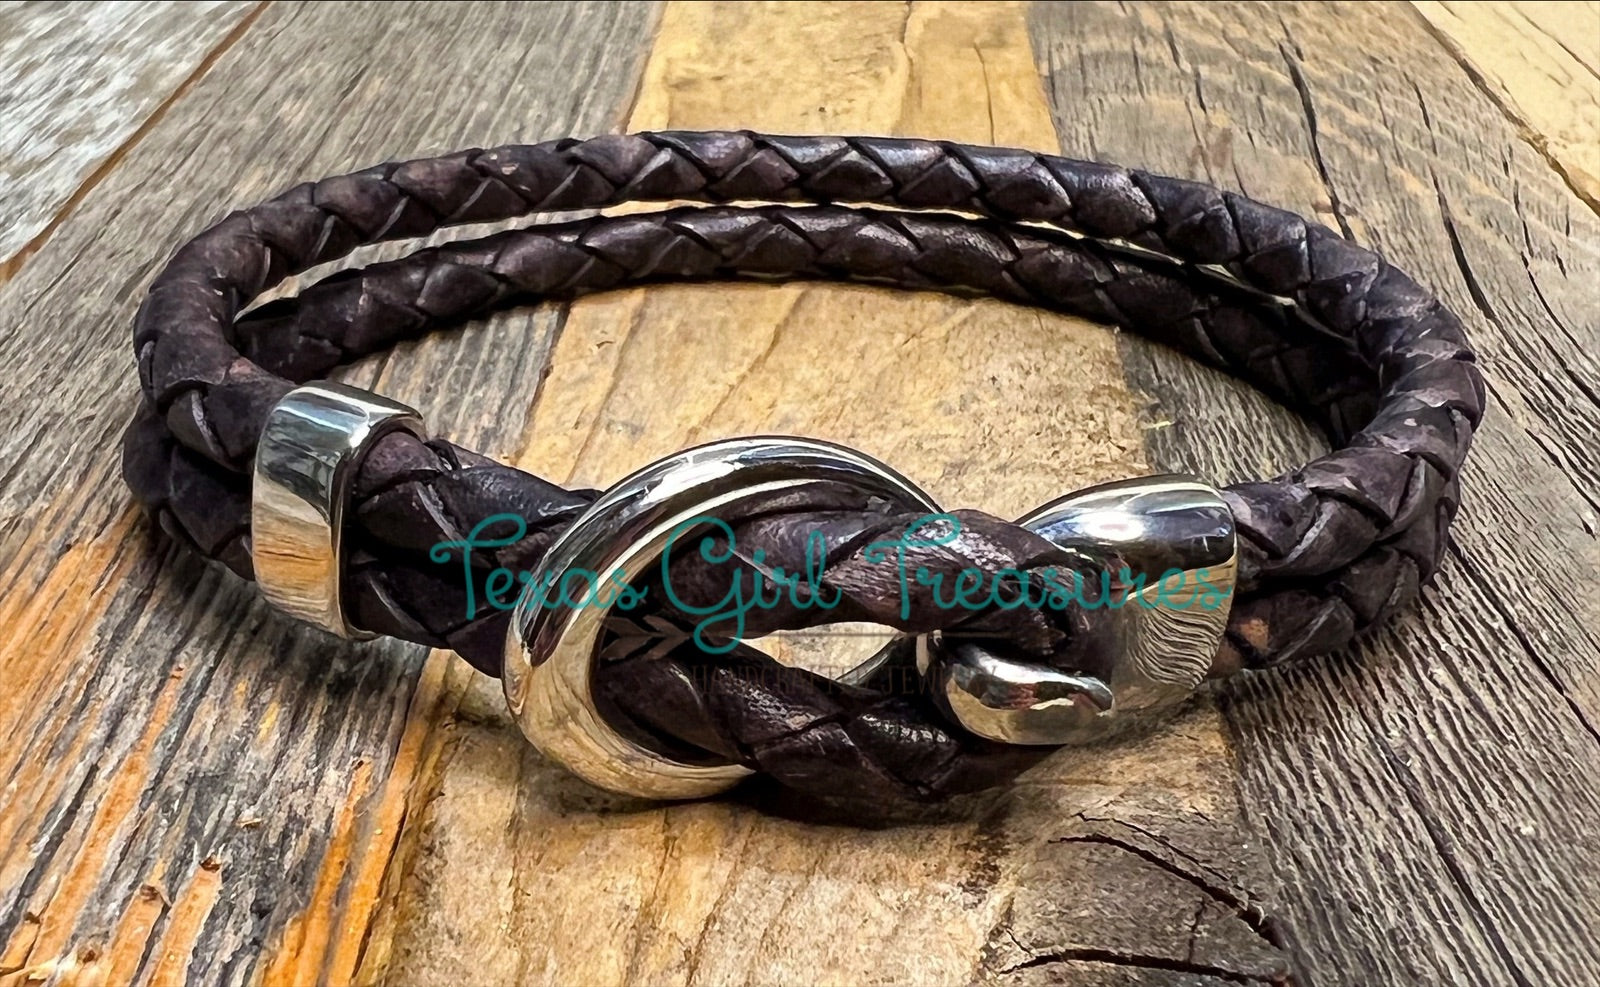 BRAIDED LEATHER BRACELET With Hook. Custom Made to Fit Your Wrist Size. in  Brown or Black,thin or Thick. Handbraided With Sturdy Metal Clasp -   Israel